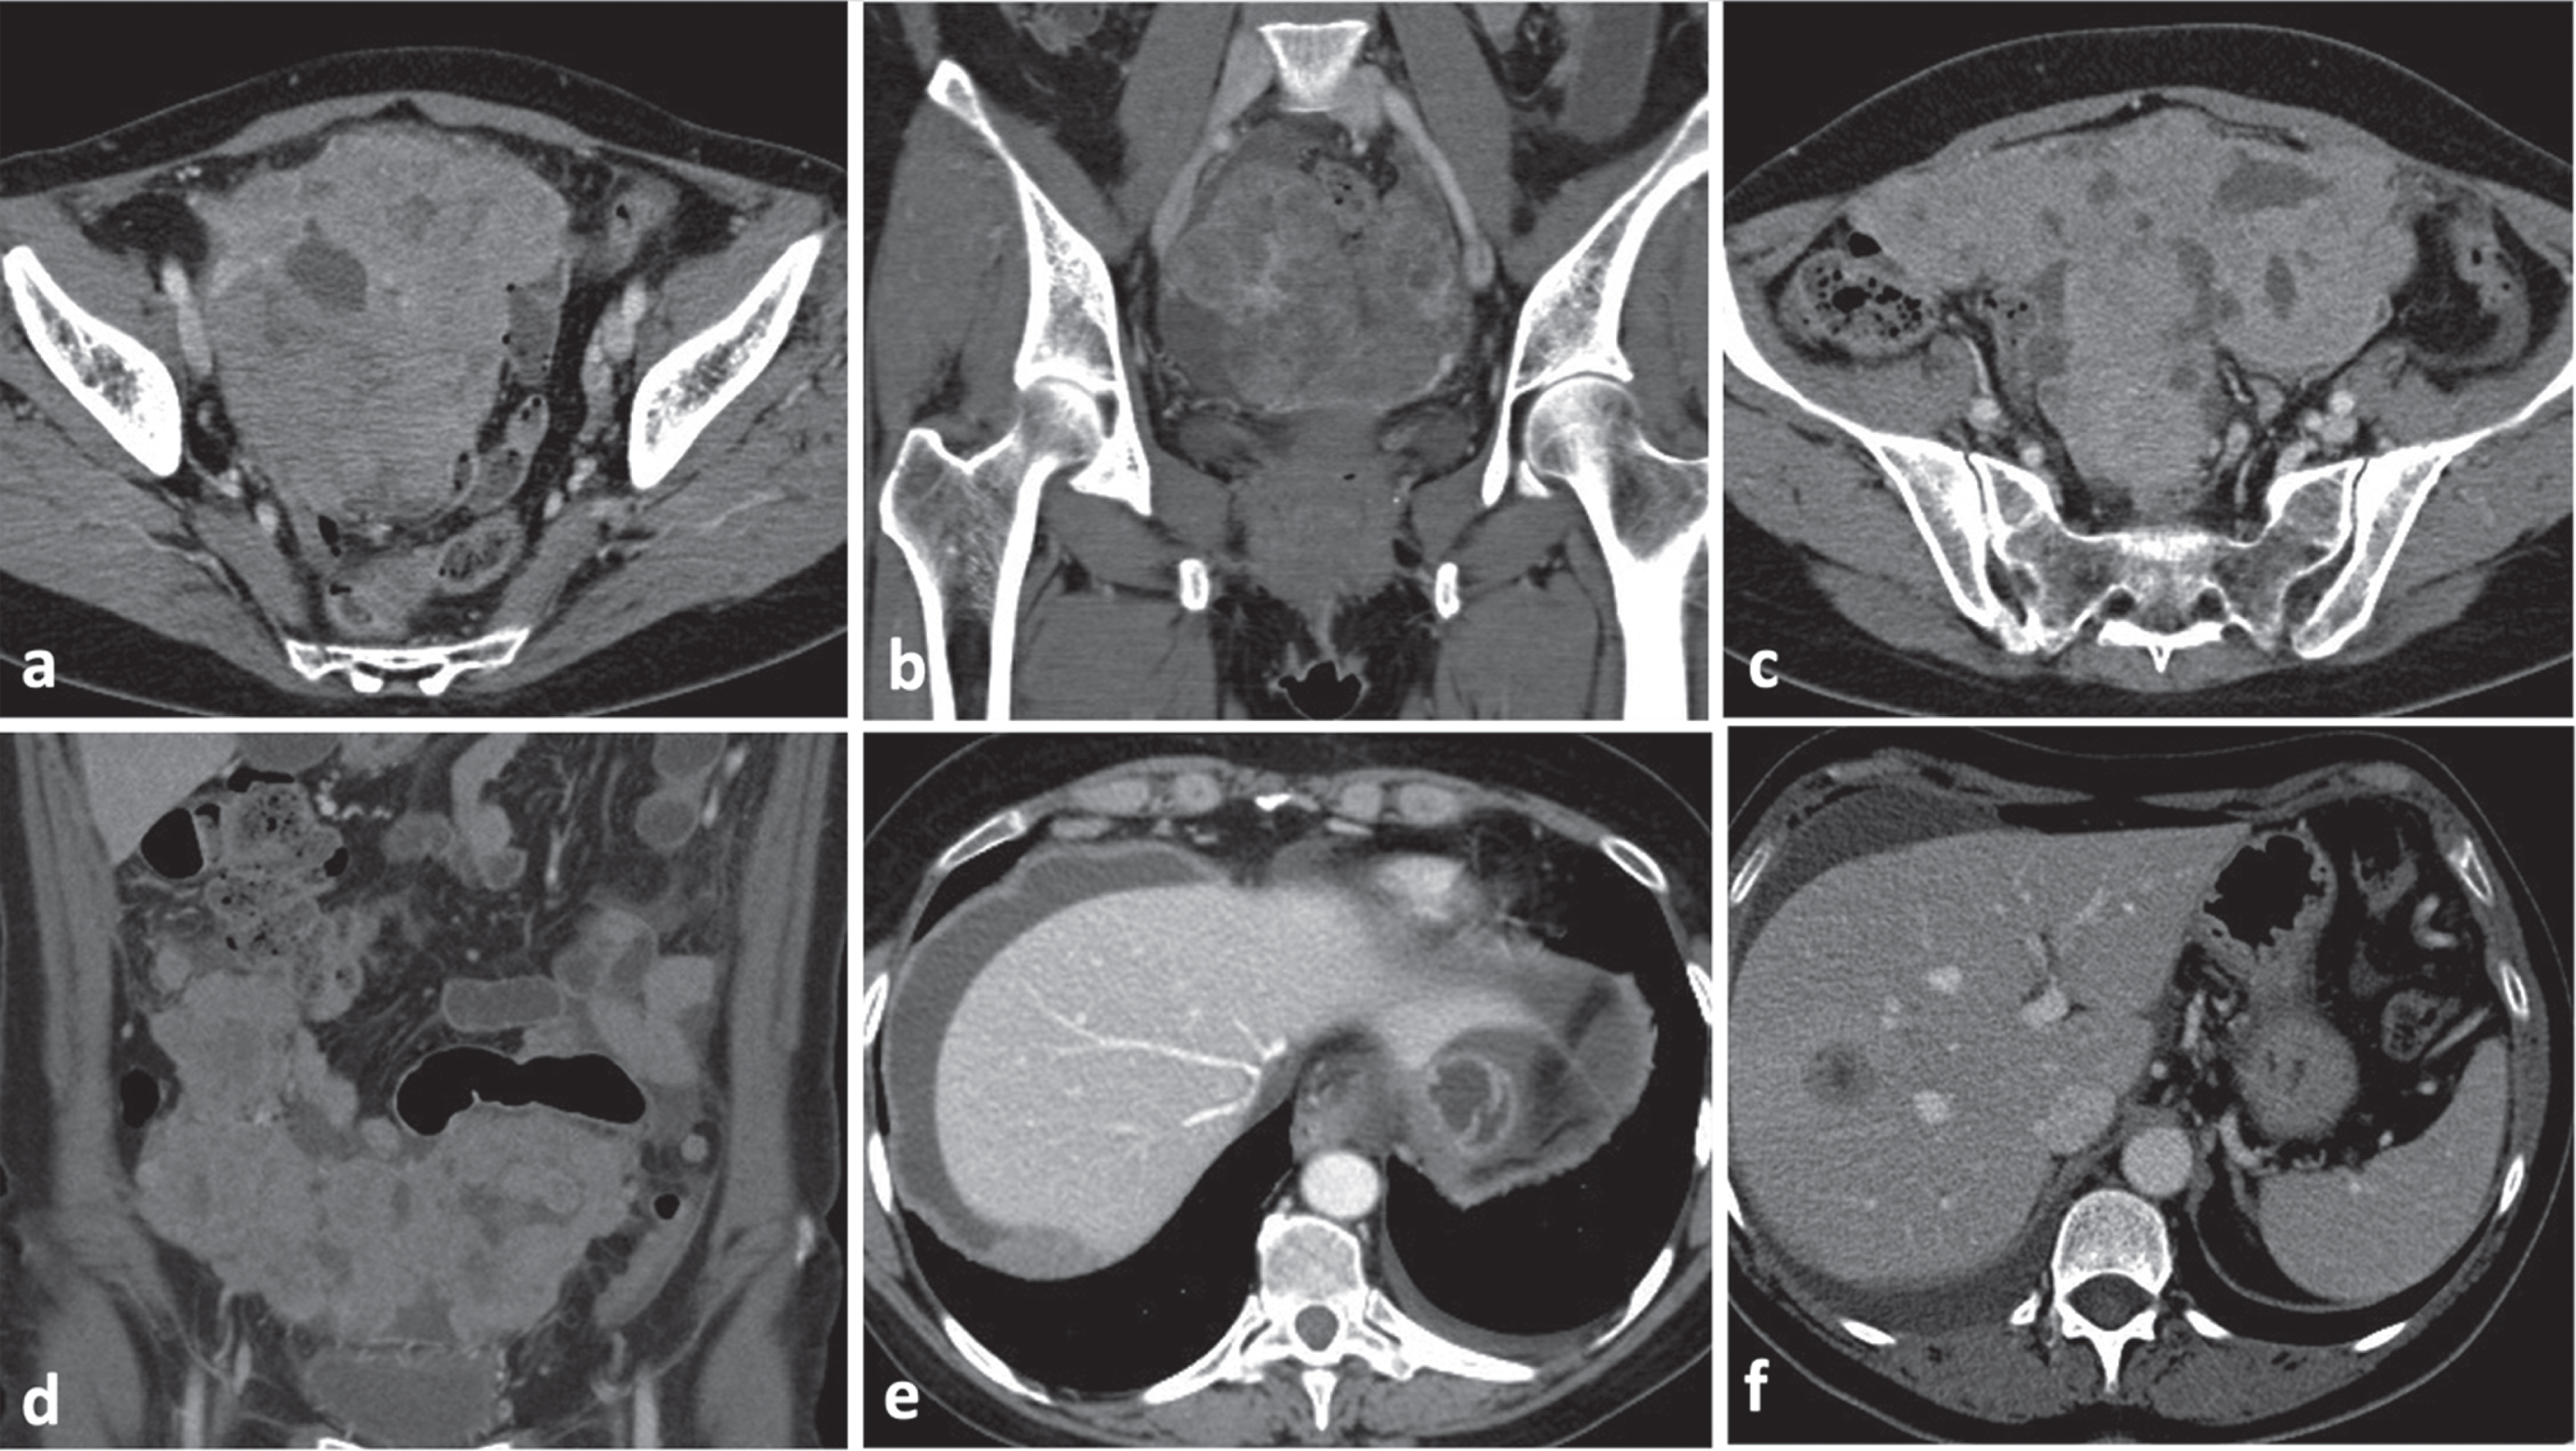 BRCA-mutated OC typical features consist in: bilateral ovarian masses with a solid/predominantly solid structures (Fig. 2a-b); macronodular carcinomatosis with predominant nodular morphologic pattern characterized by well-defined/ rounded /“pushing” borders; PD composed of macronodular implants which confluence each other in a plaque-like thickenings of omental fat assuming the so called “omental cake” aspect (Fig. 2c-d); presence of pericardiophrenic lymphadenopathy (short-axis greater than 0.5 cm) (Fig. 2e); presence of liver metastasis (Fig. 2f).